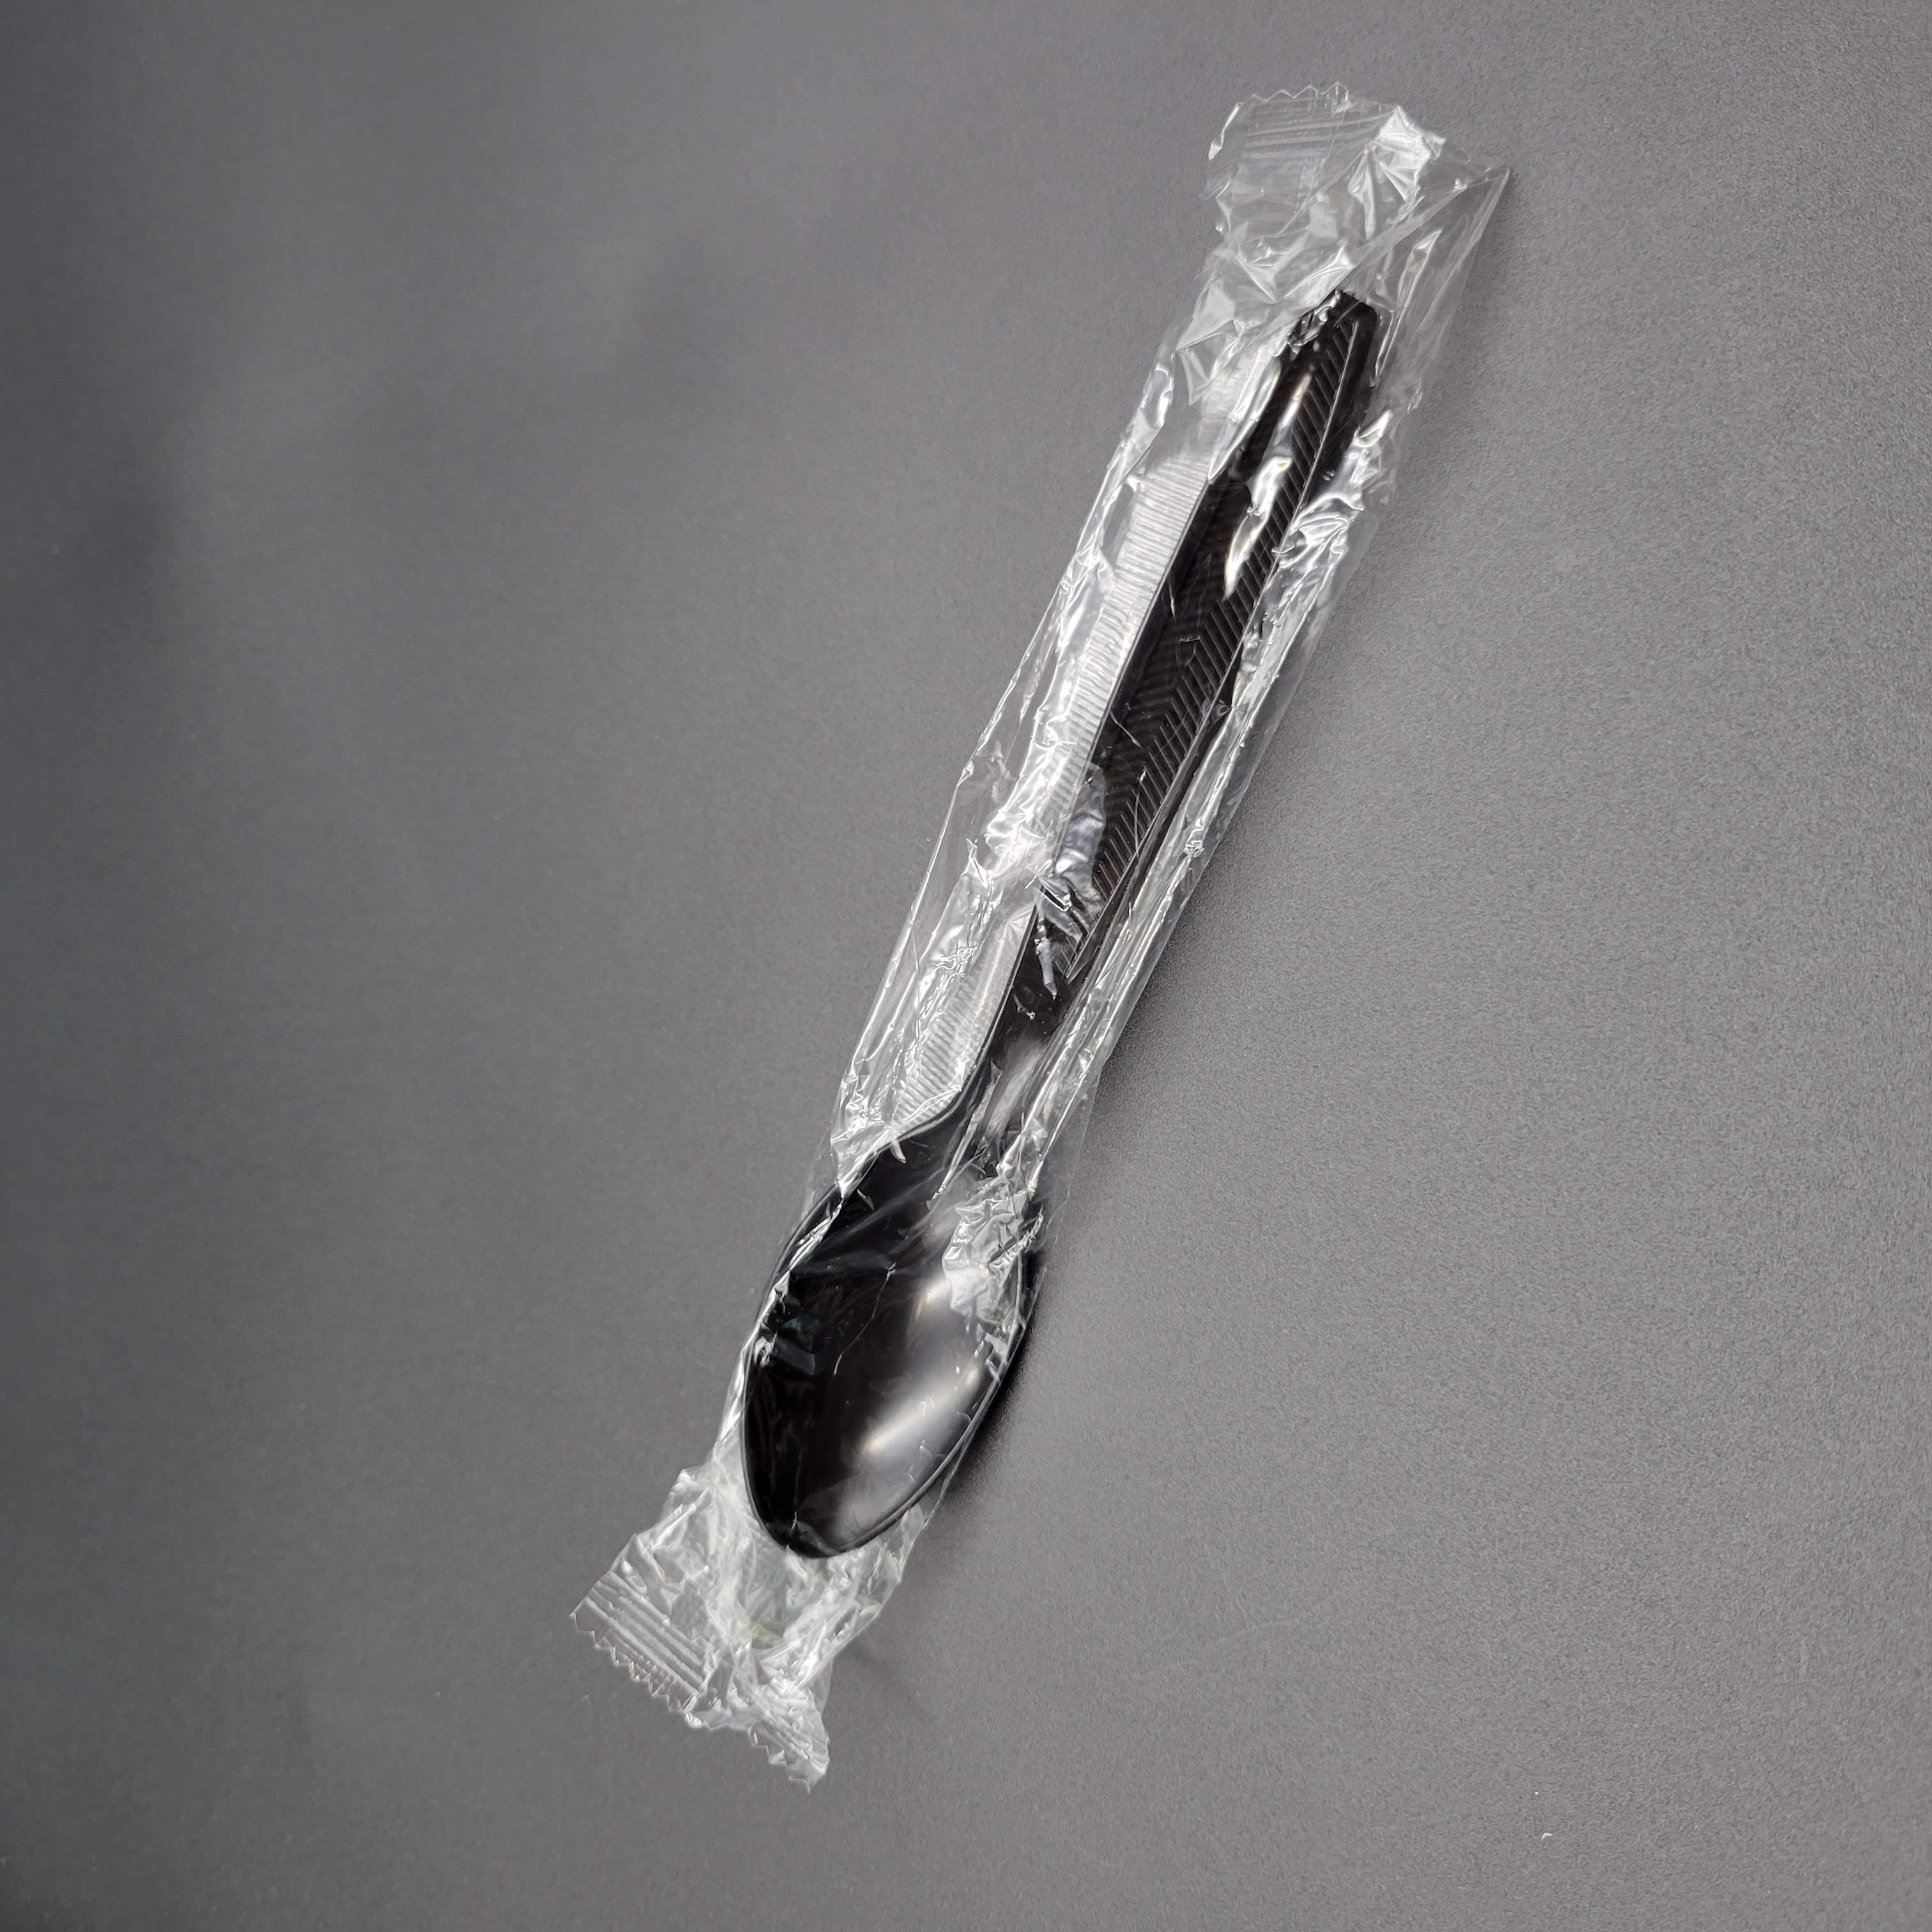 Individually Wrapped Heavy Weight PS Teaspoon Black - 1000/Case